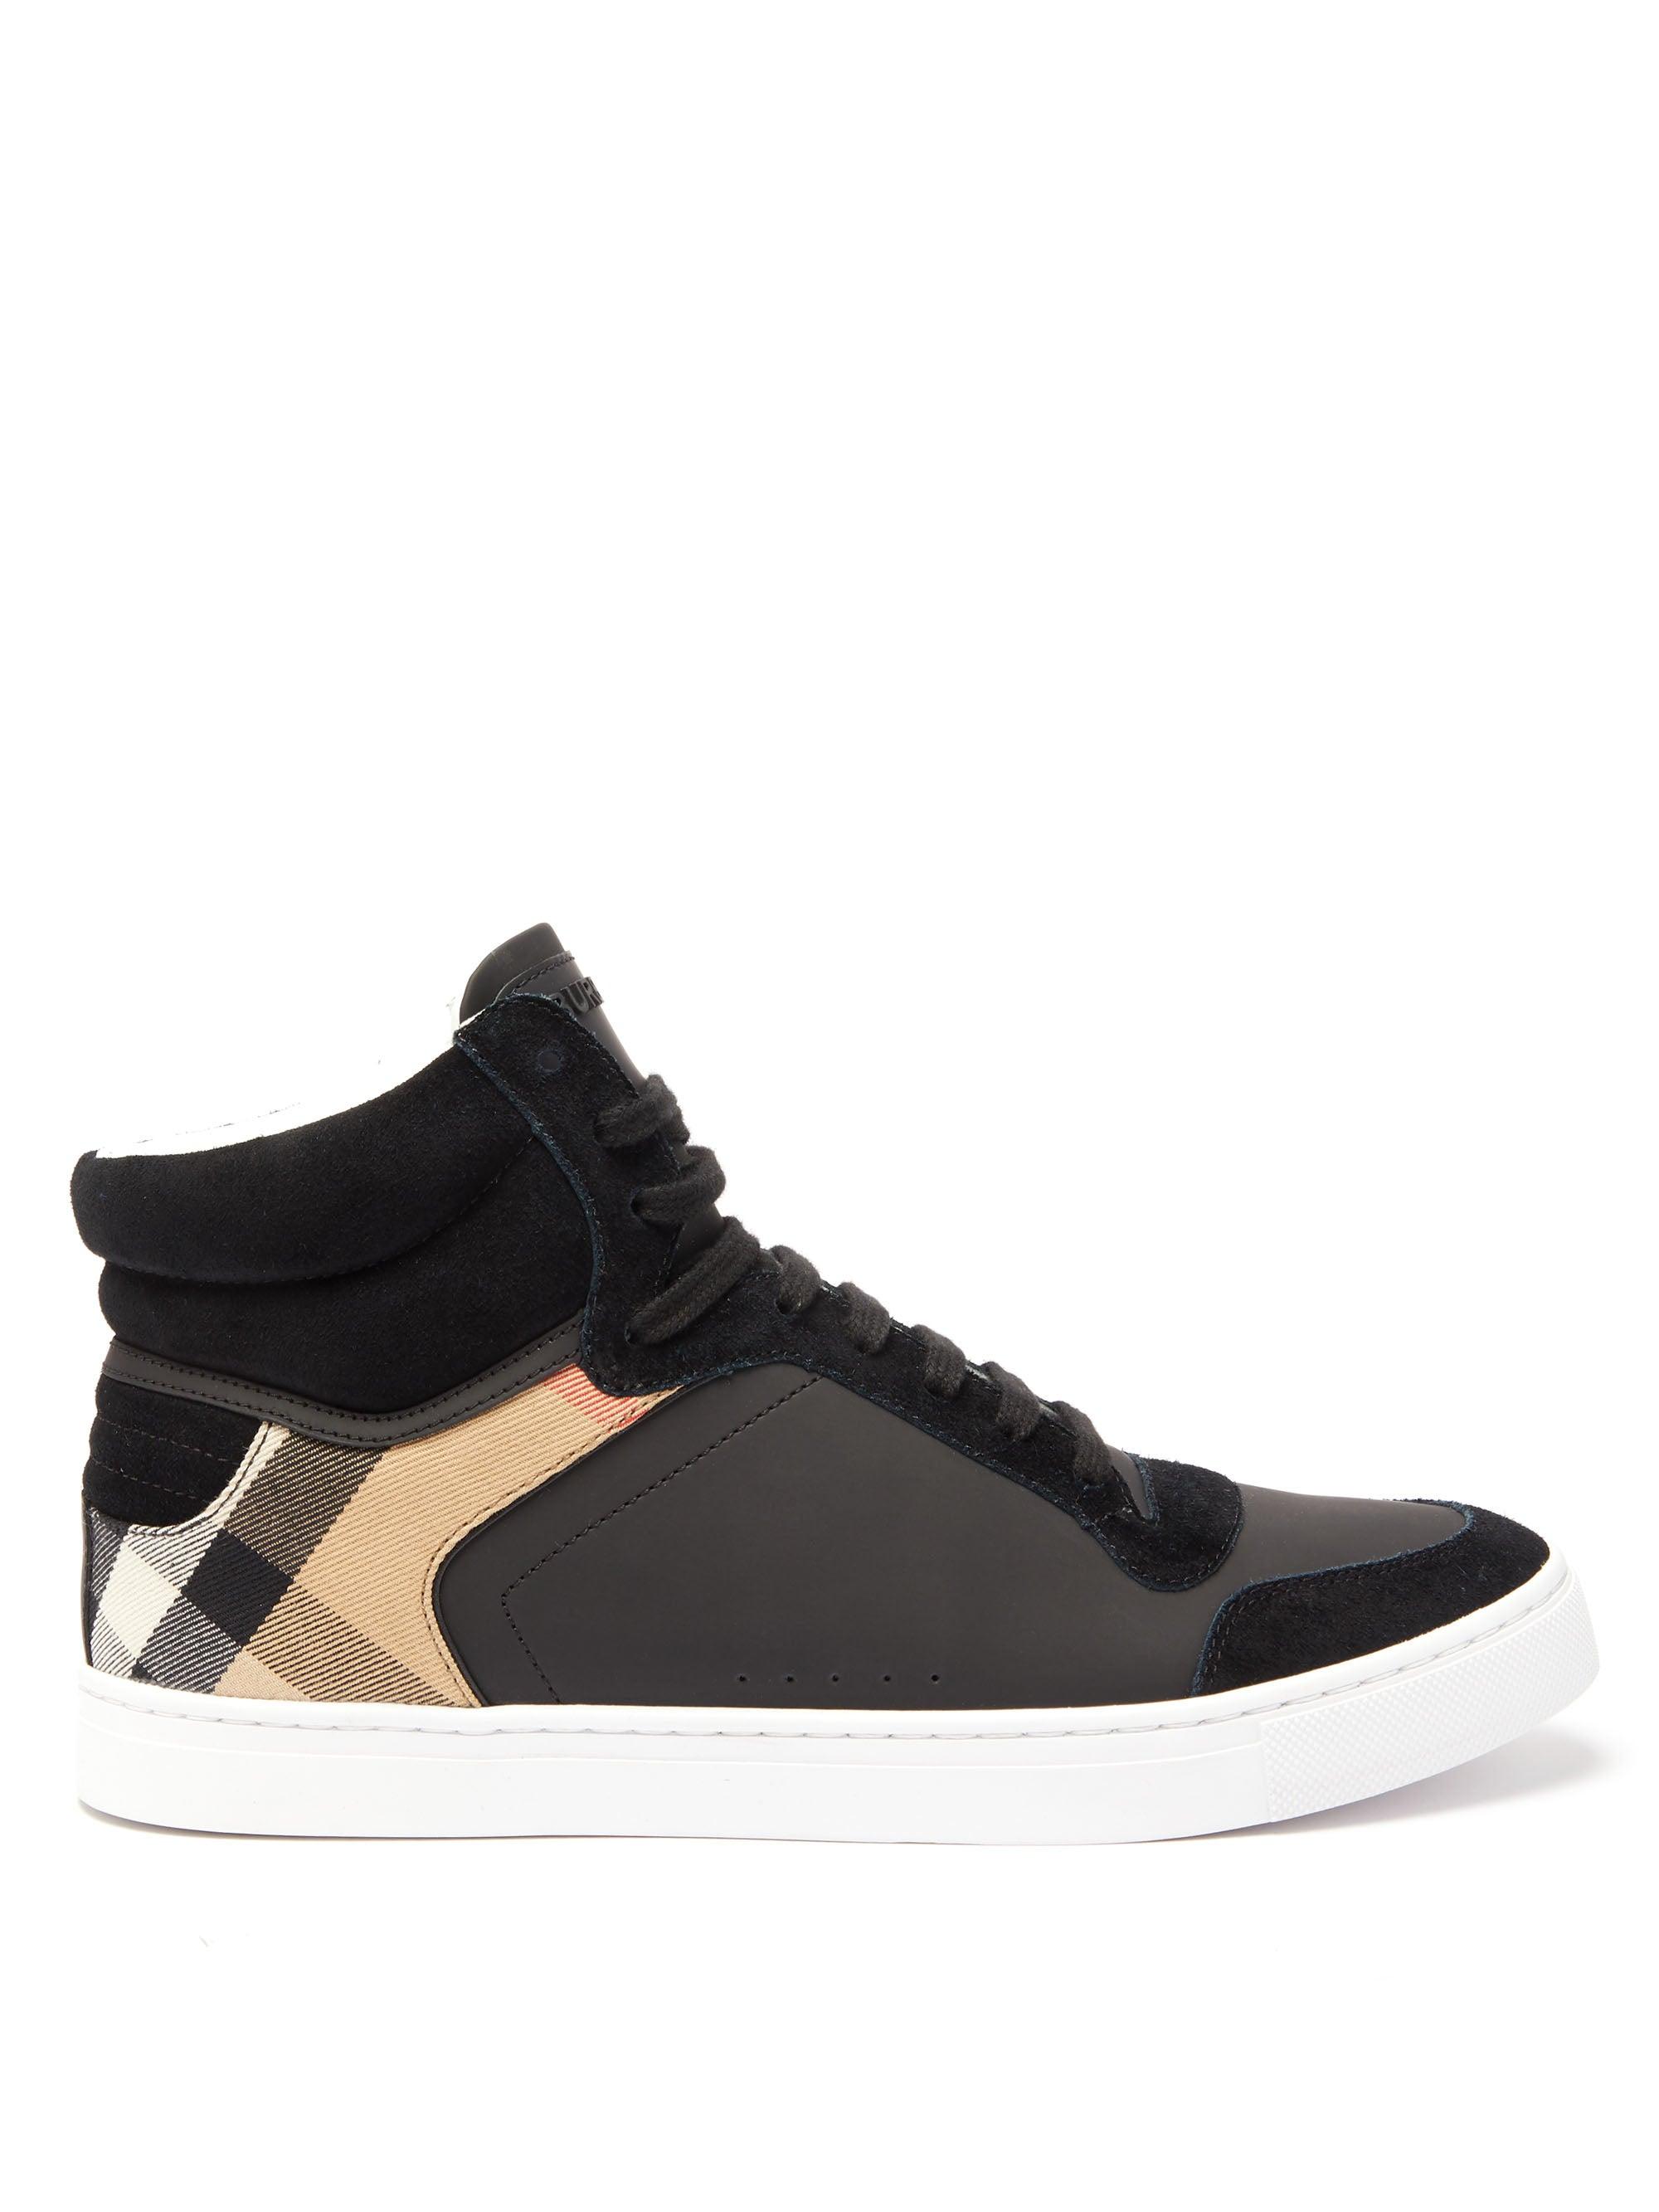 Burberry Leather Reeth High Top Sneakers in Black for Men - Lyst